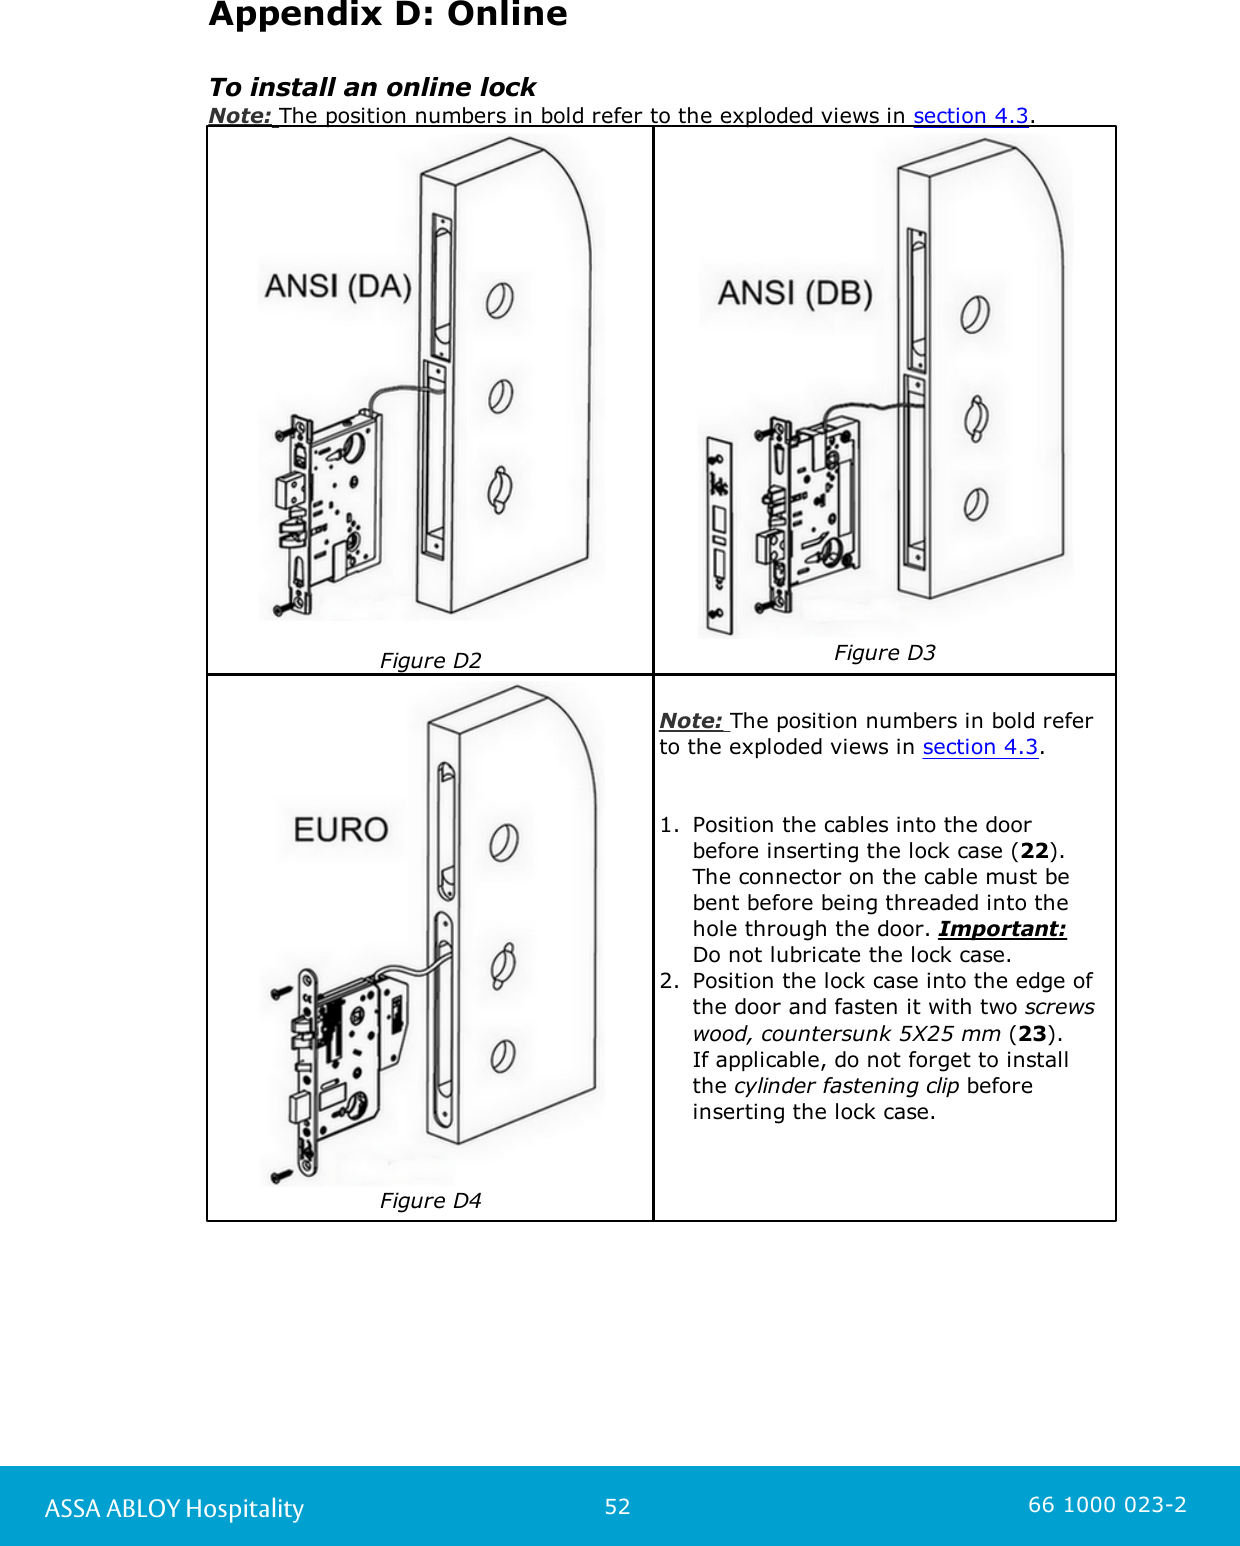 52ASSA ABLOY Hospitality 66 1000 023-2Appendix D: OnlineTo install an online lockNote: The position numbers in bold refer to the exploded views in section 4.3. Figure D2Figure D3Figure D4Note: The position numbers in bold referto the exploded views in section 4.3. 1. Position the cables into the door before inserting the lock case (22). The connector on the cable must bebent before being threaded into thehole through the door. Important: Do not lubricate the lock case. 2. Position the lock case into the edge ofthe door and fasten it with two screwswood, countersunk 5X25 mm (23). If applicable, do not forget to installthe cylinder fastening clip beforeinserting the lock case. 